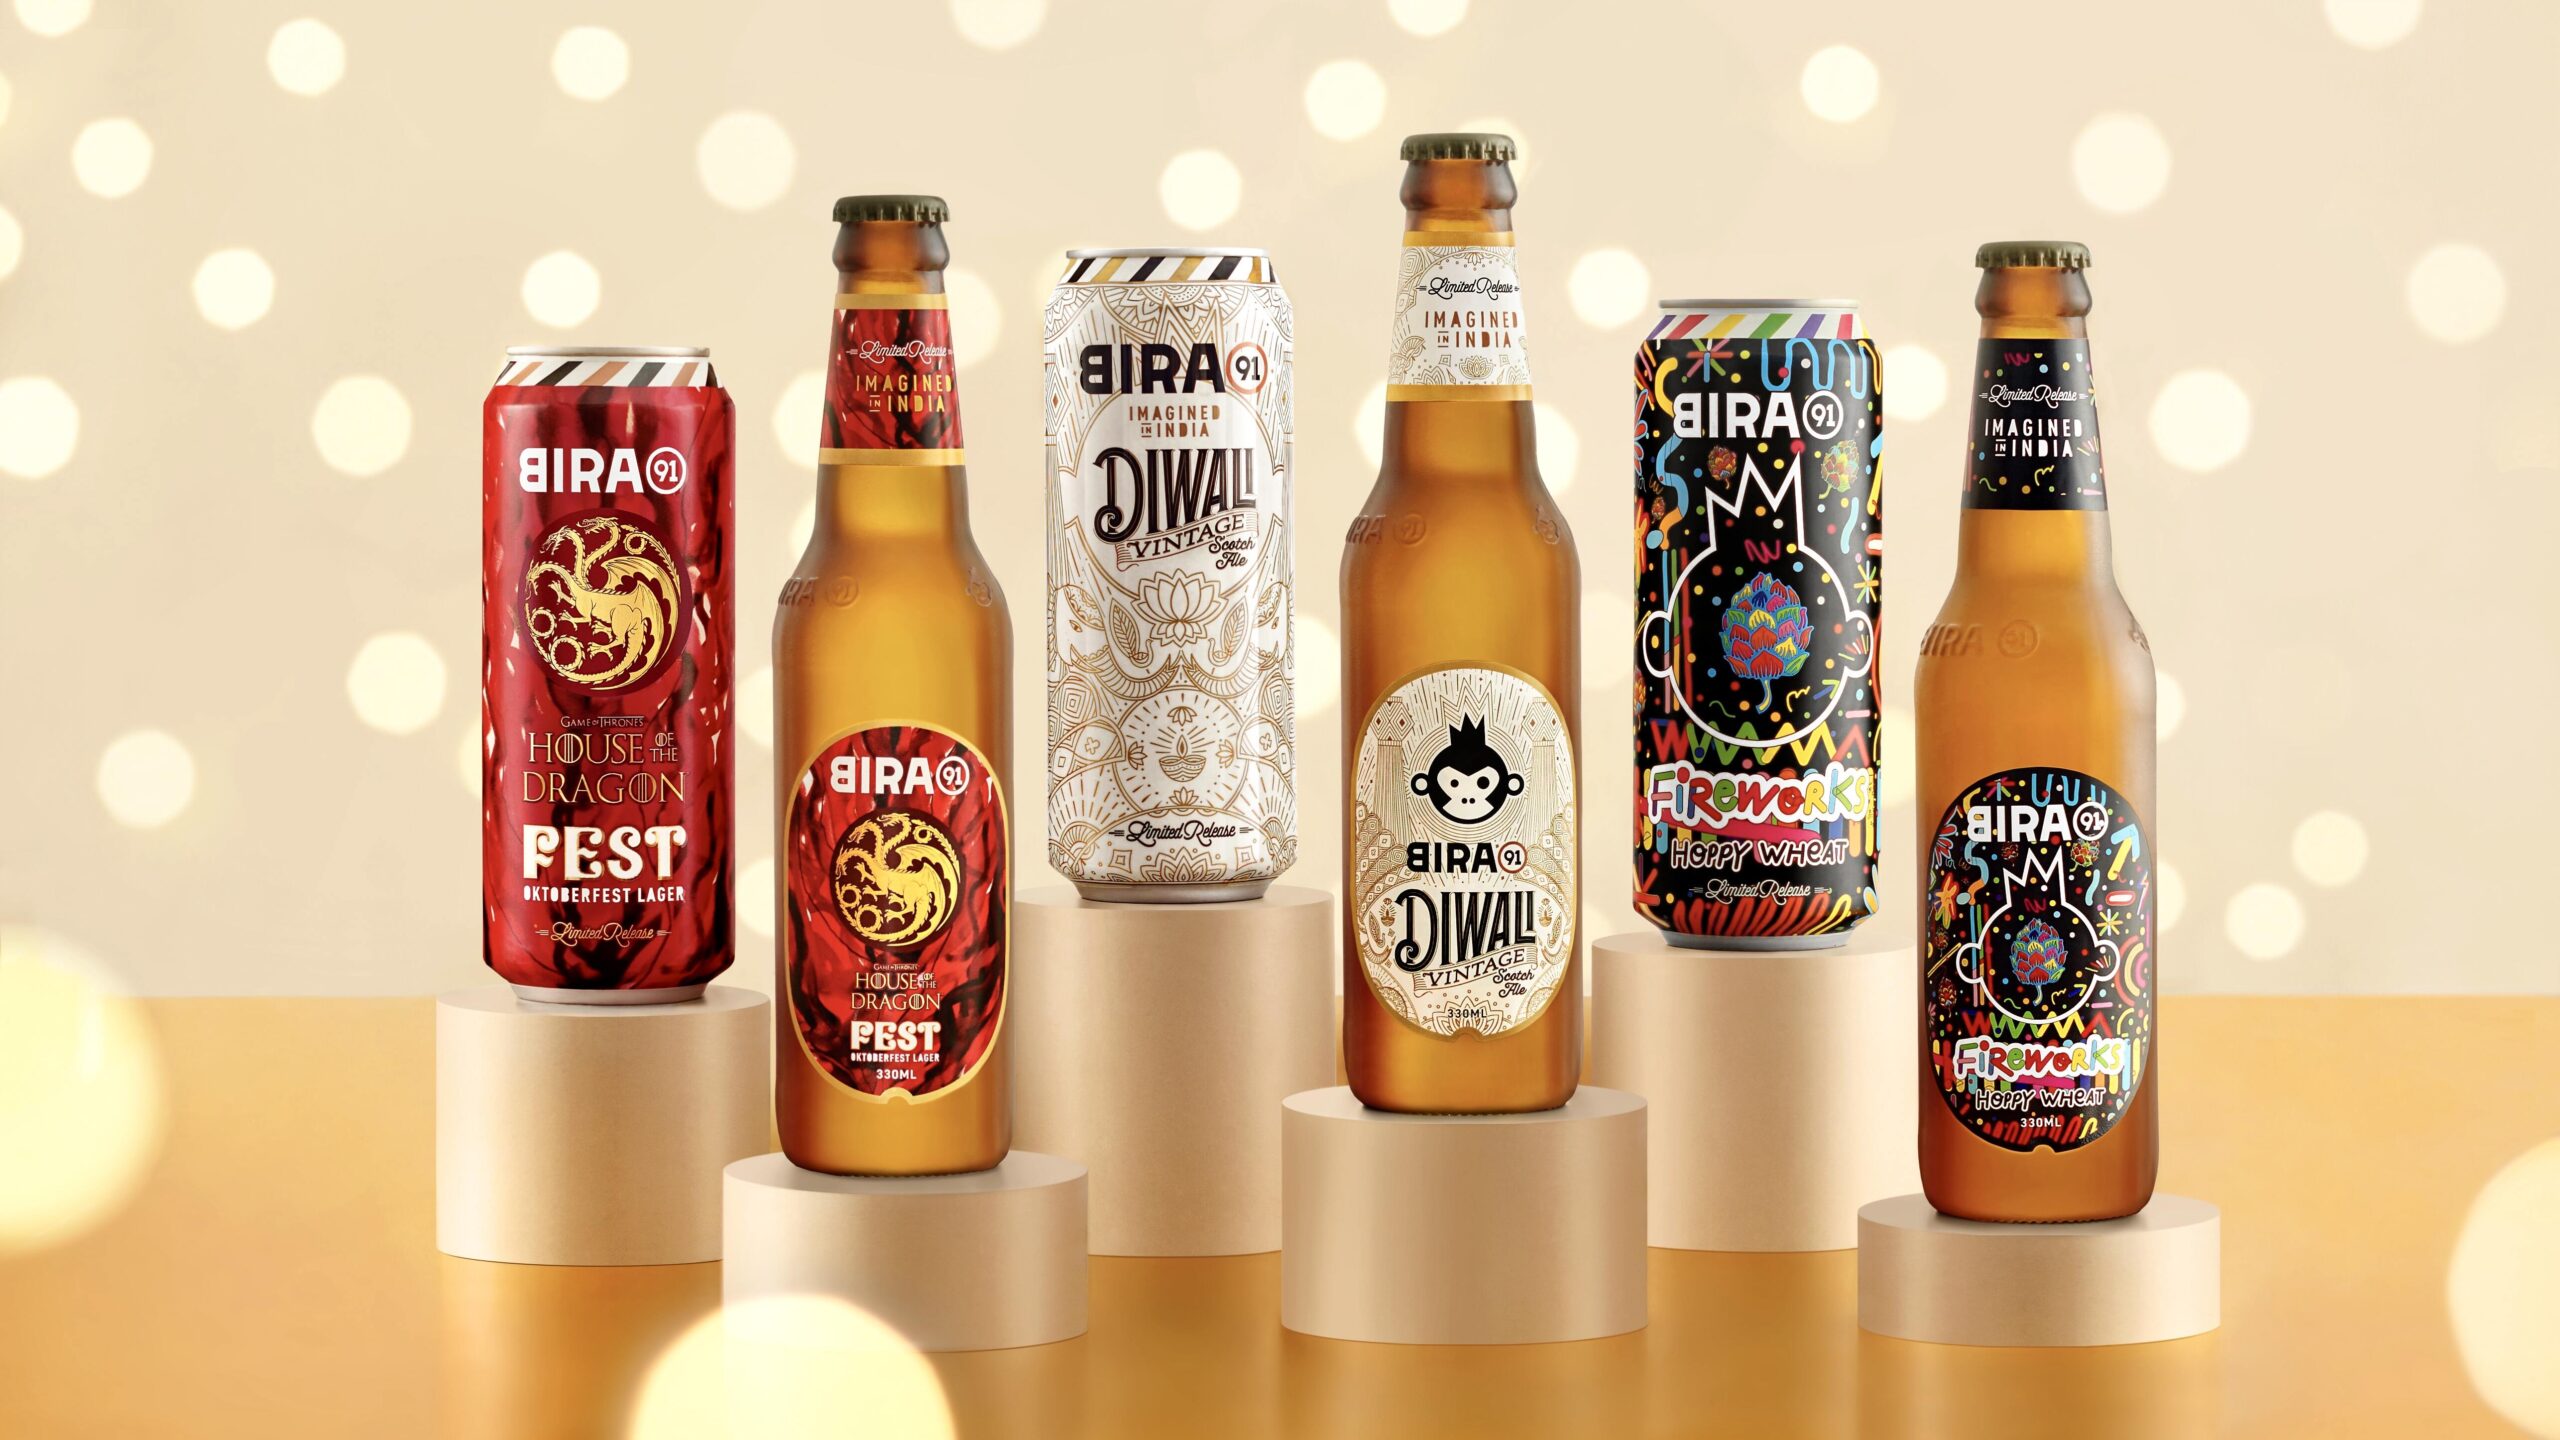 Bira 91 launches Three New Limited-Release Beers